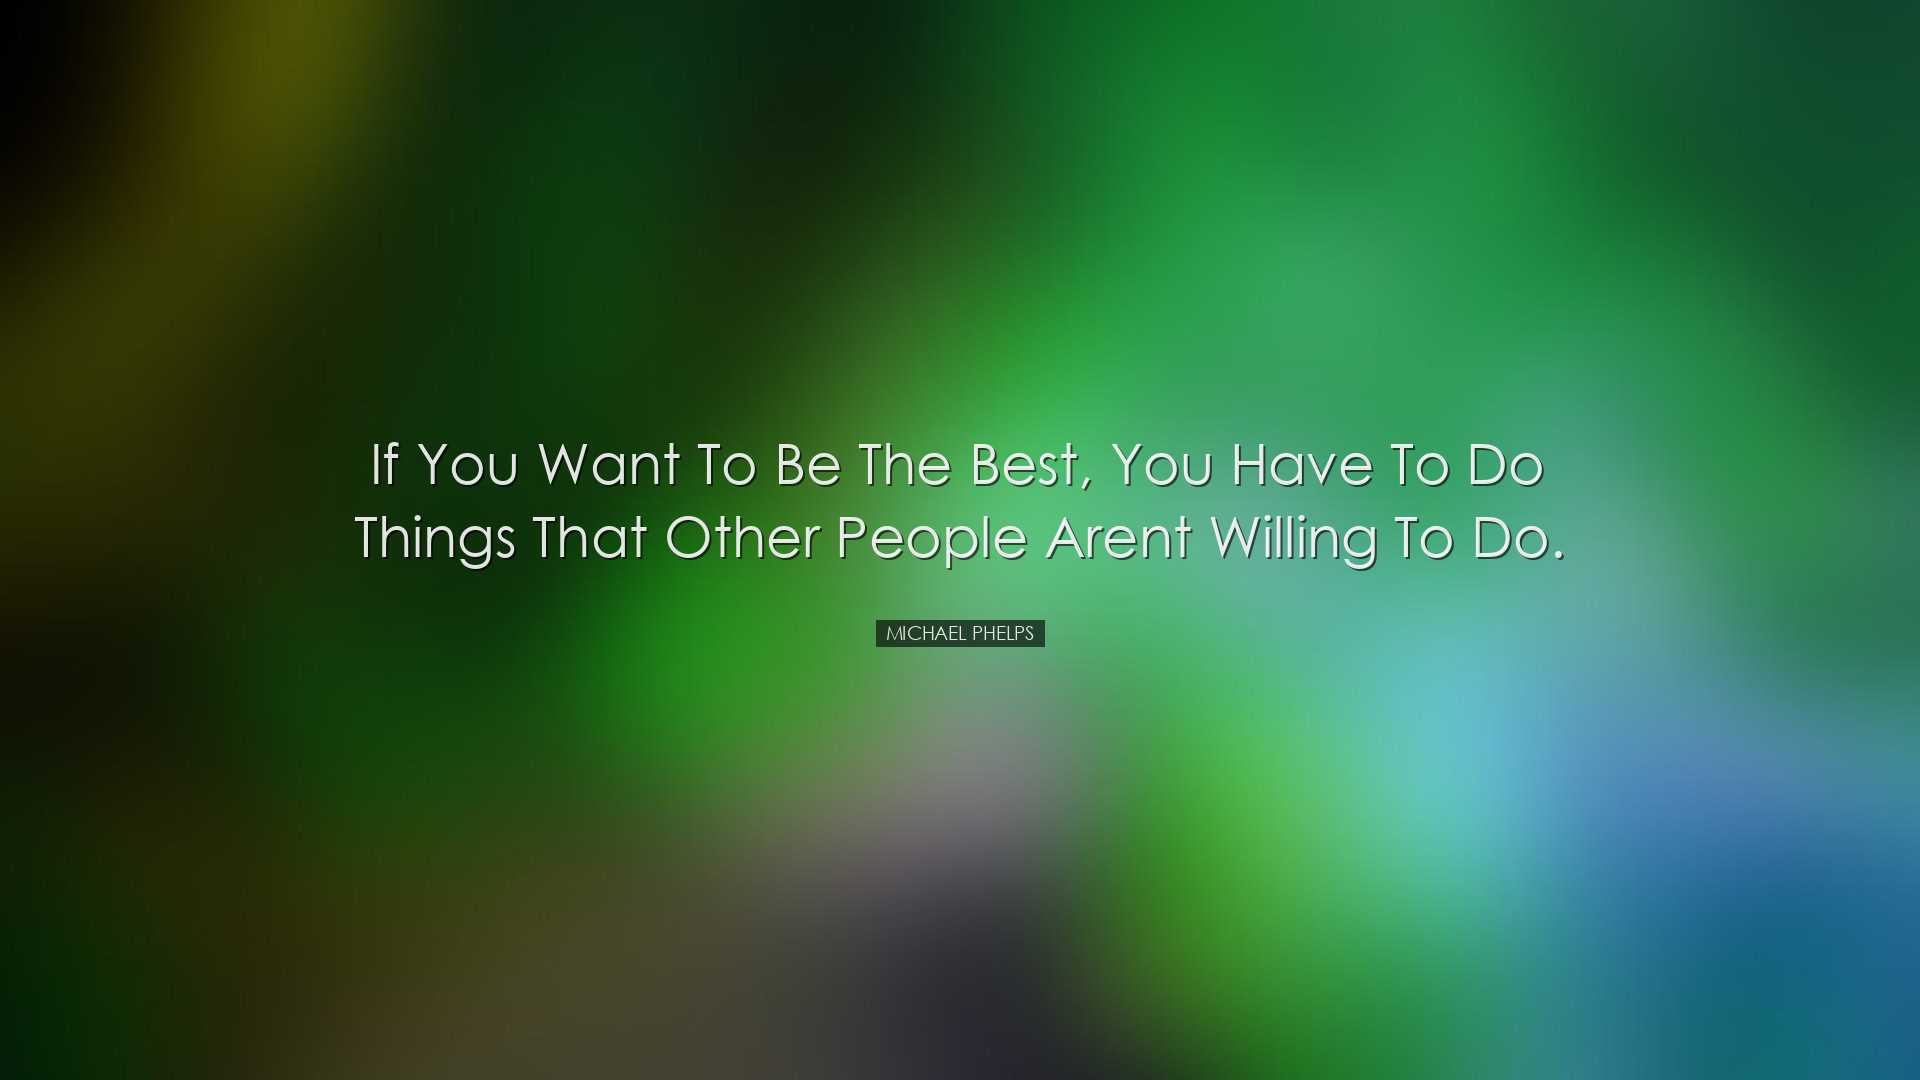 If you want to be the best, you have to do things that other peopl